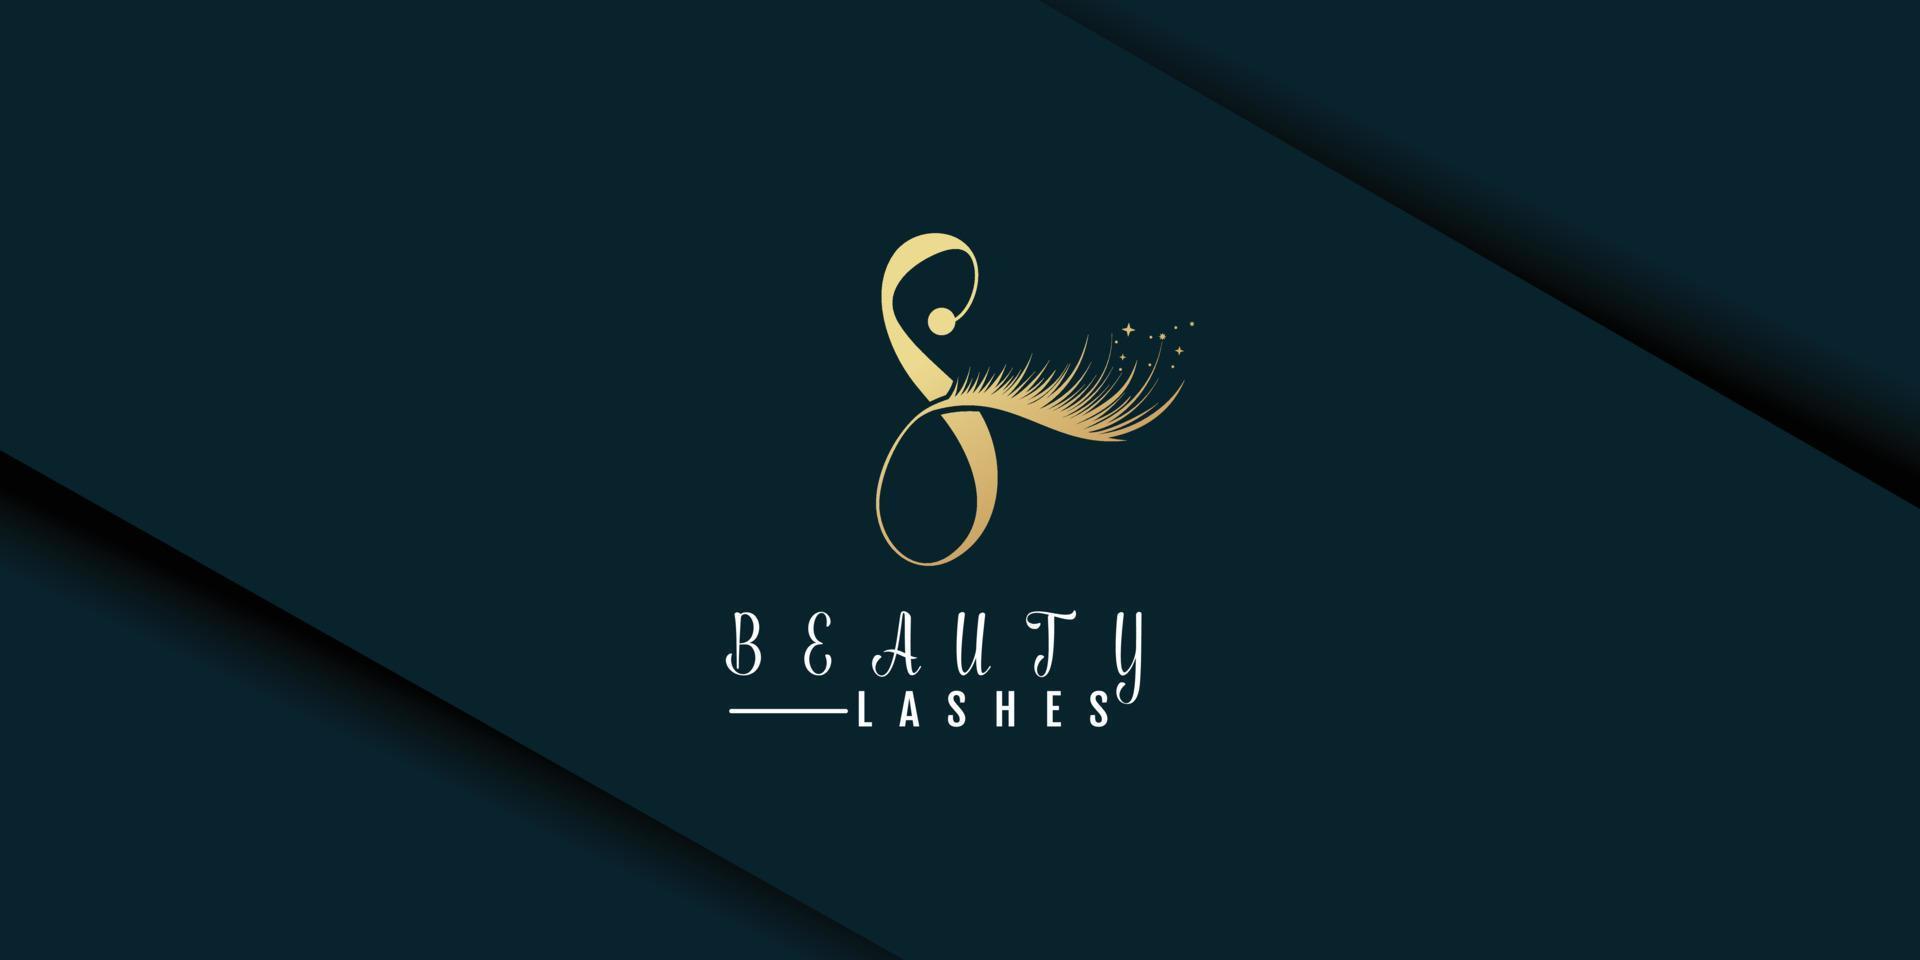 Beauty lashes logo with initial s concept design icon vector for beauty business